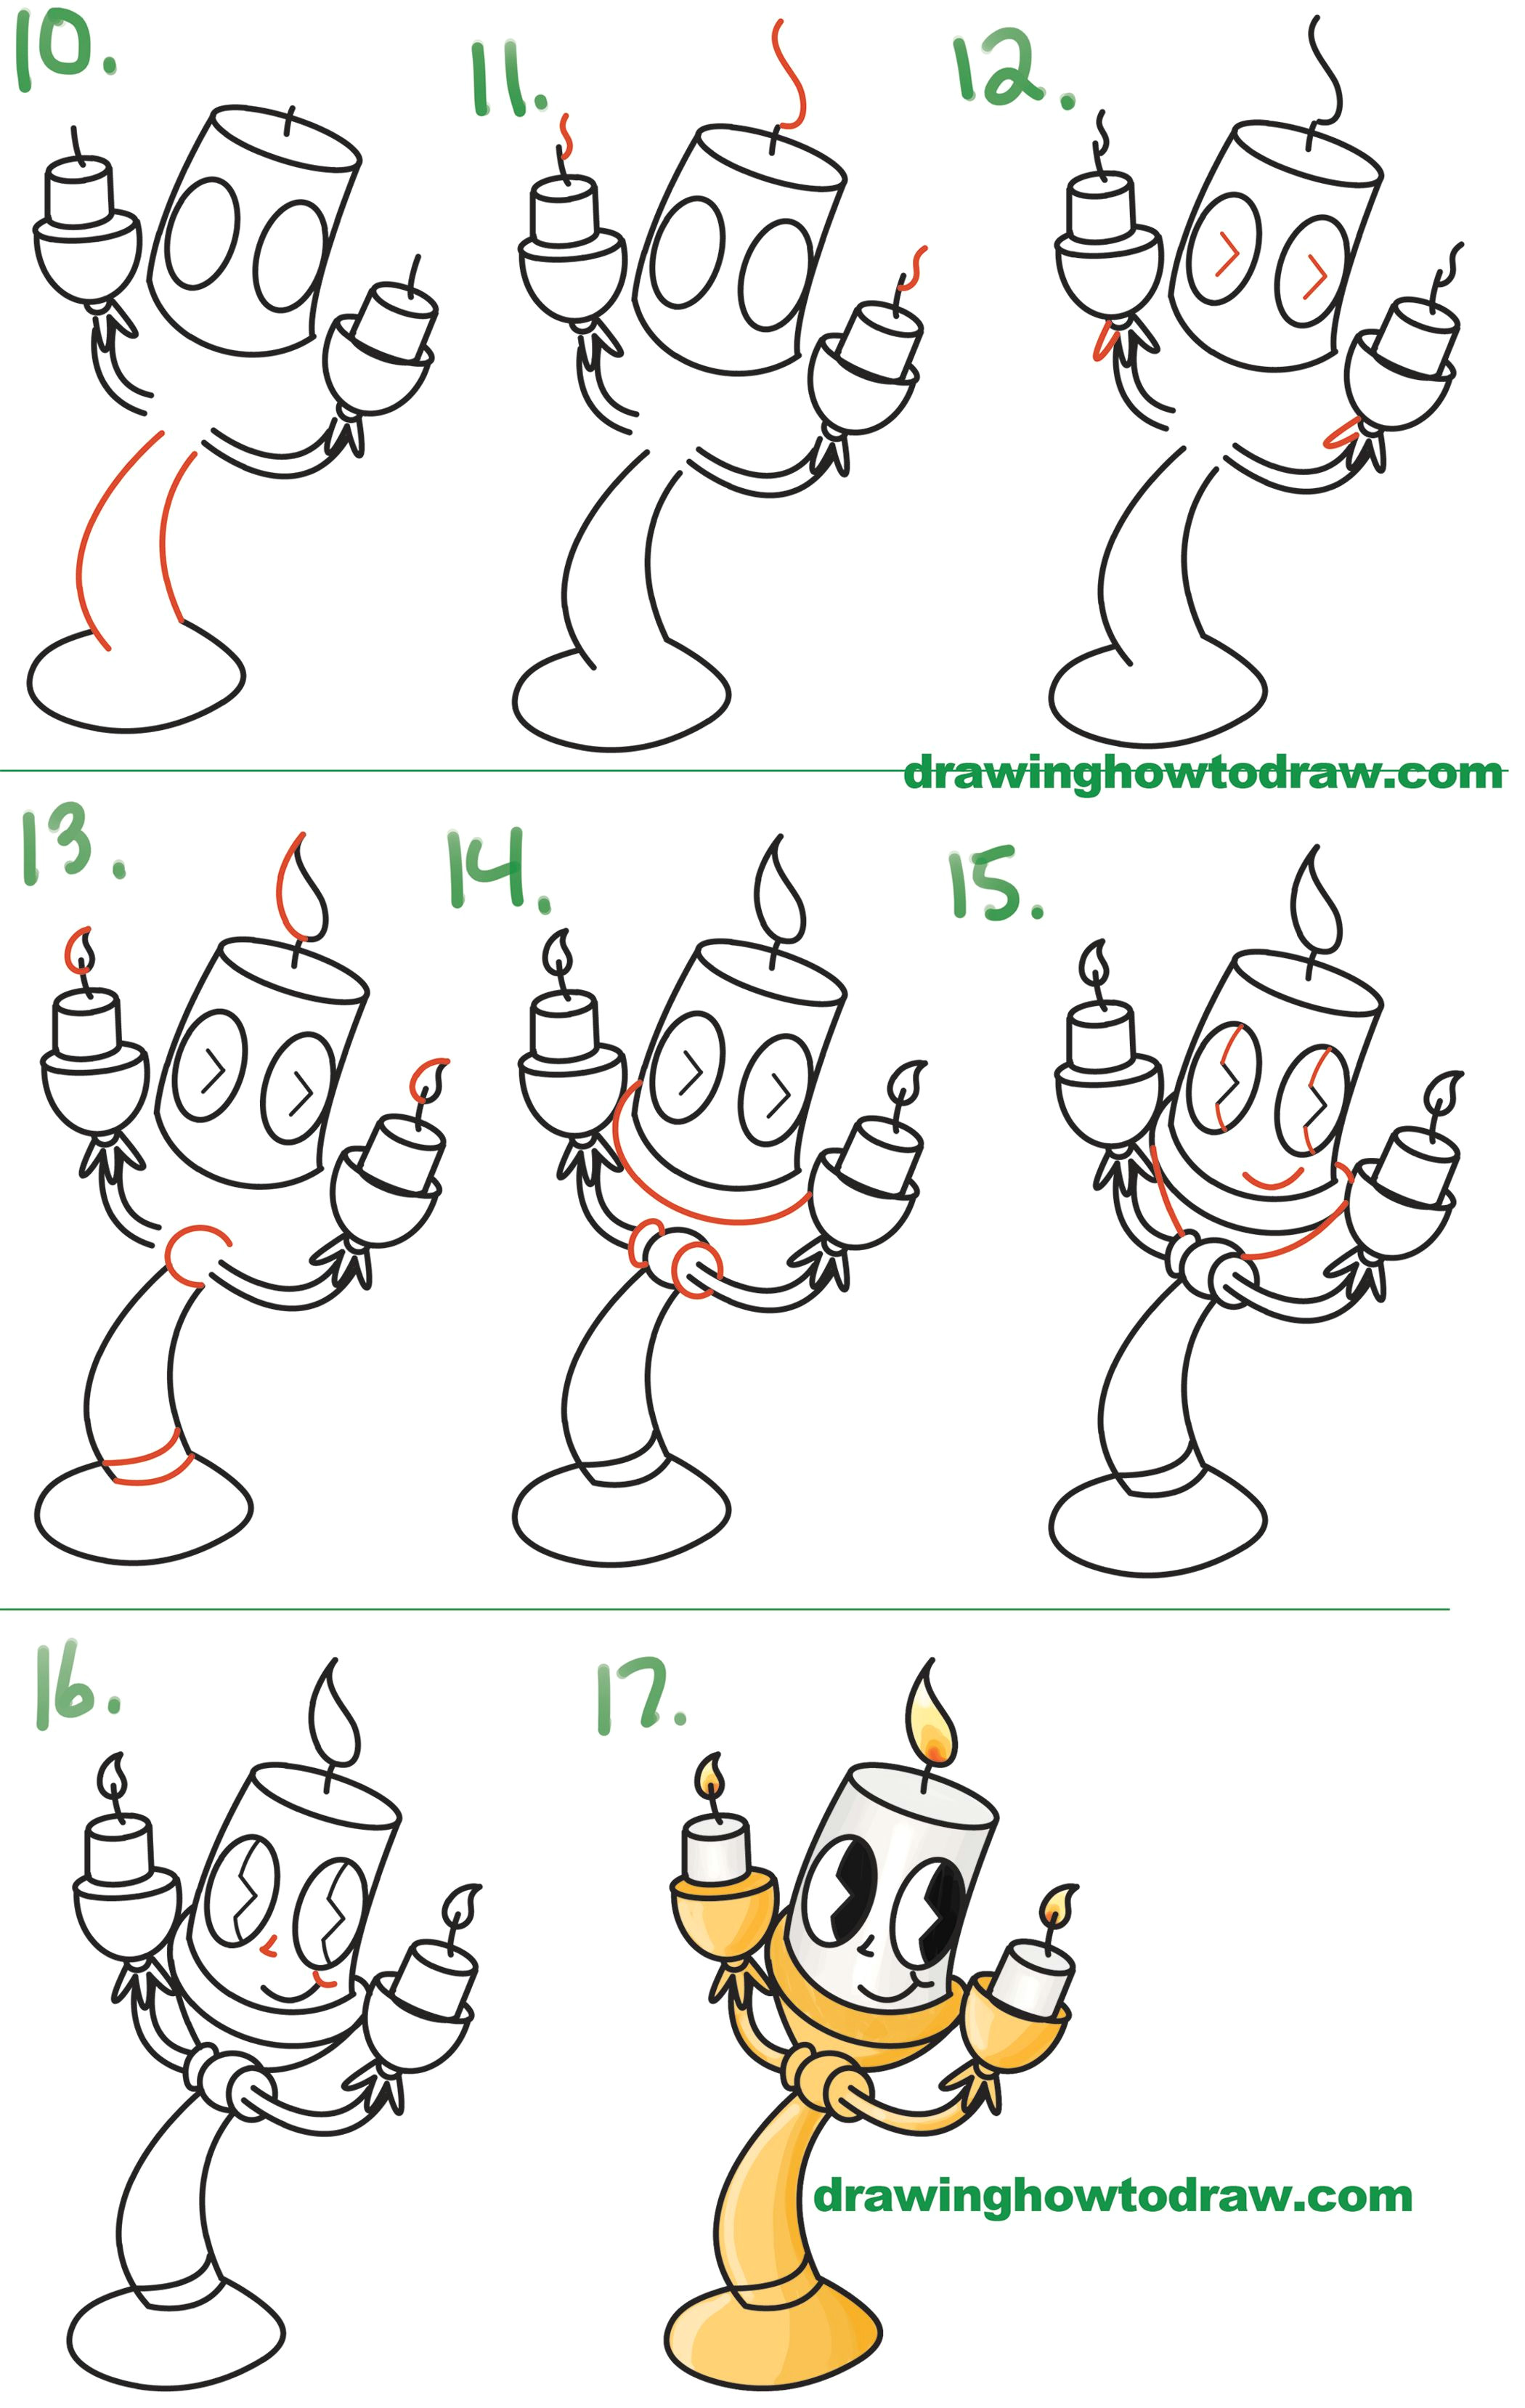 Drawing A Cartoon Cloud How to Draw Lumiere Cute Kawaii Chibi From Beauty and the Beast